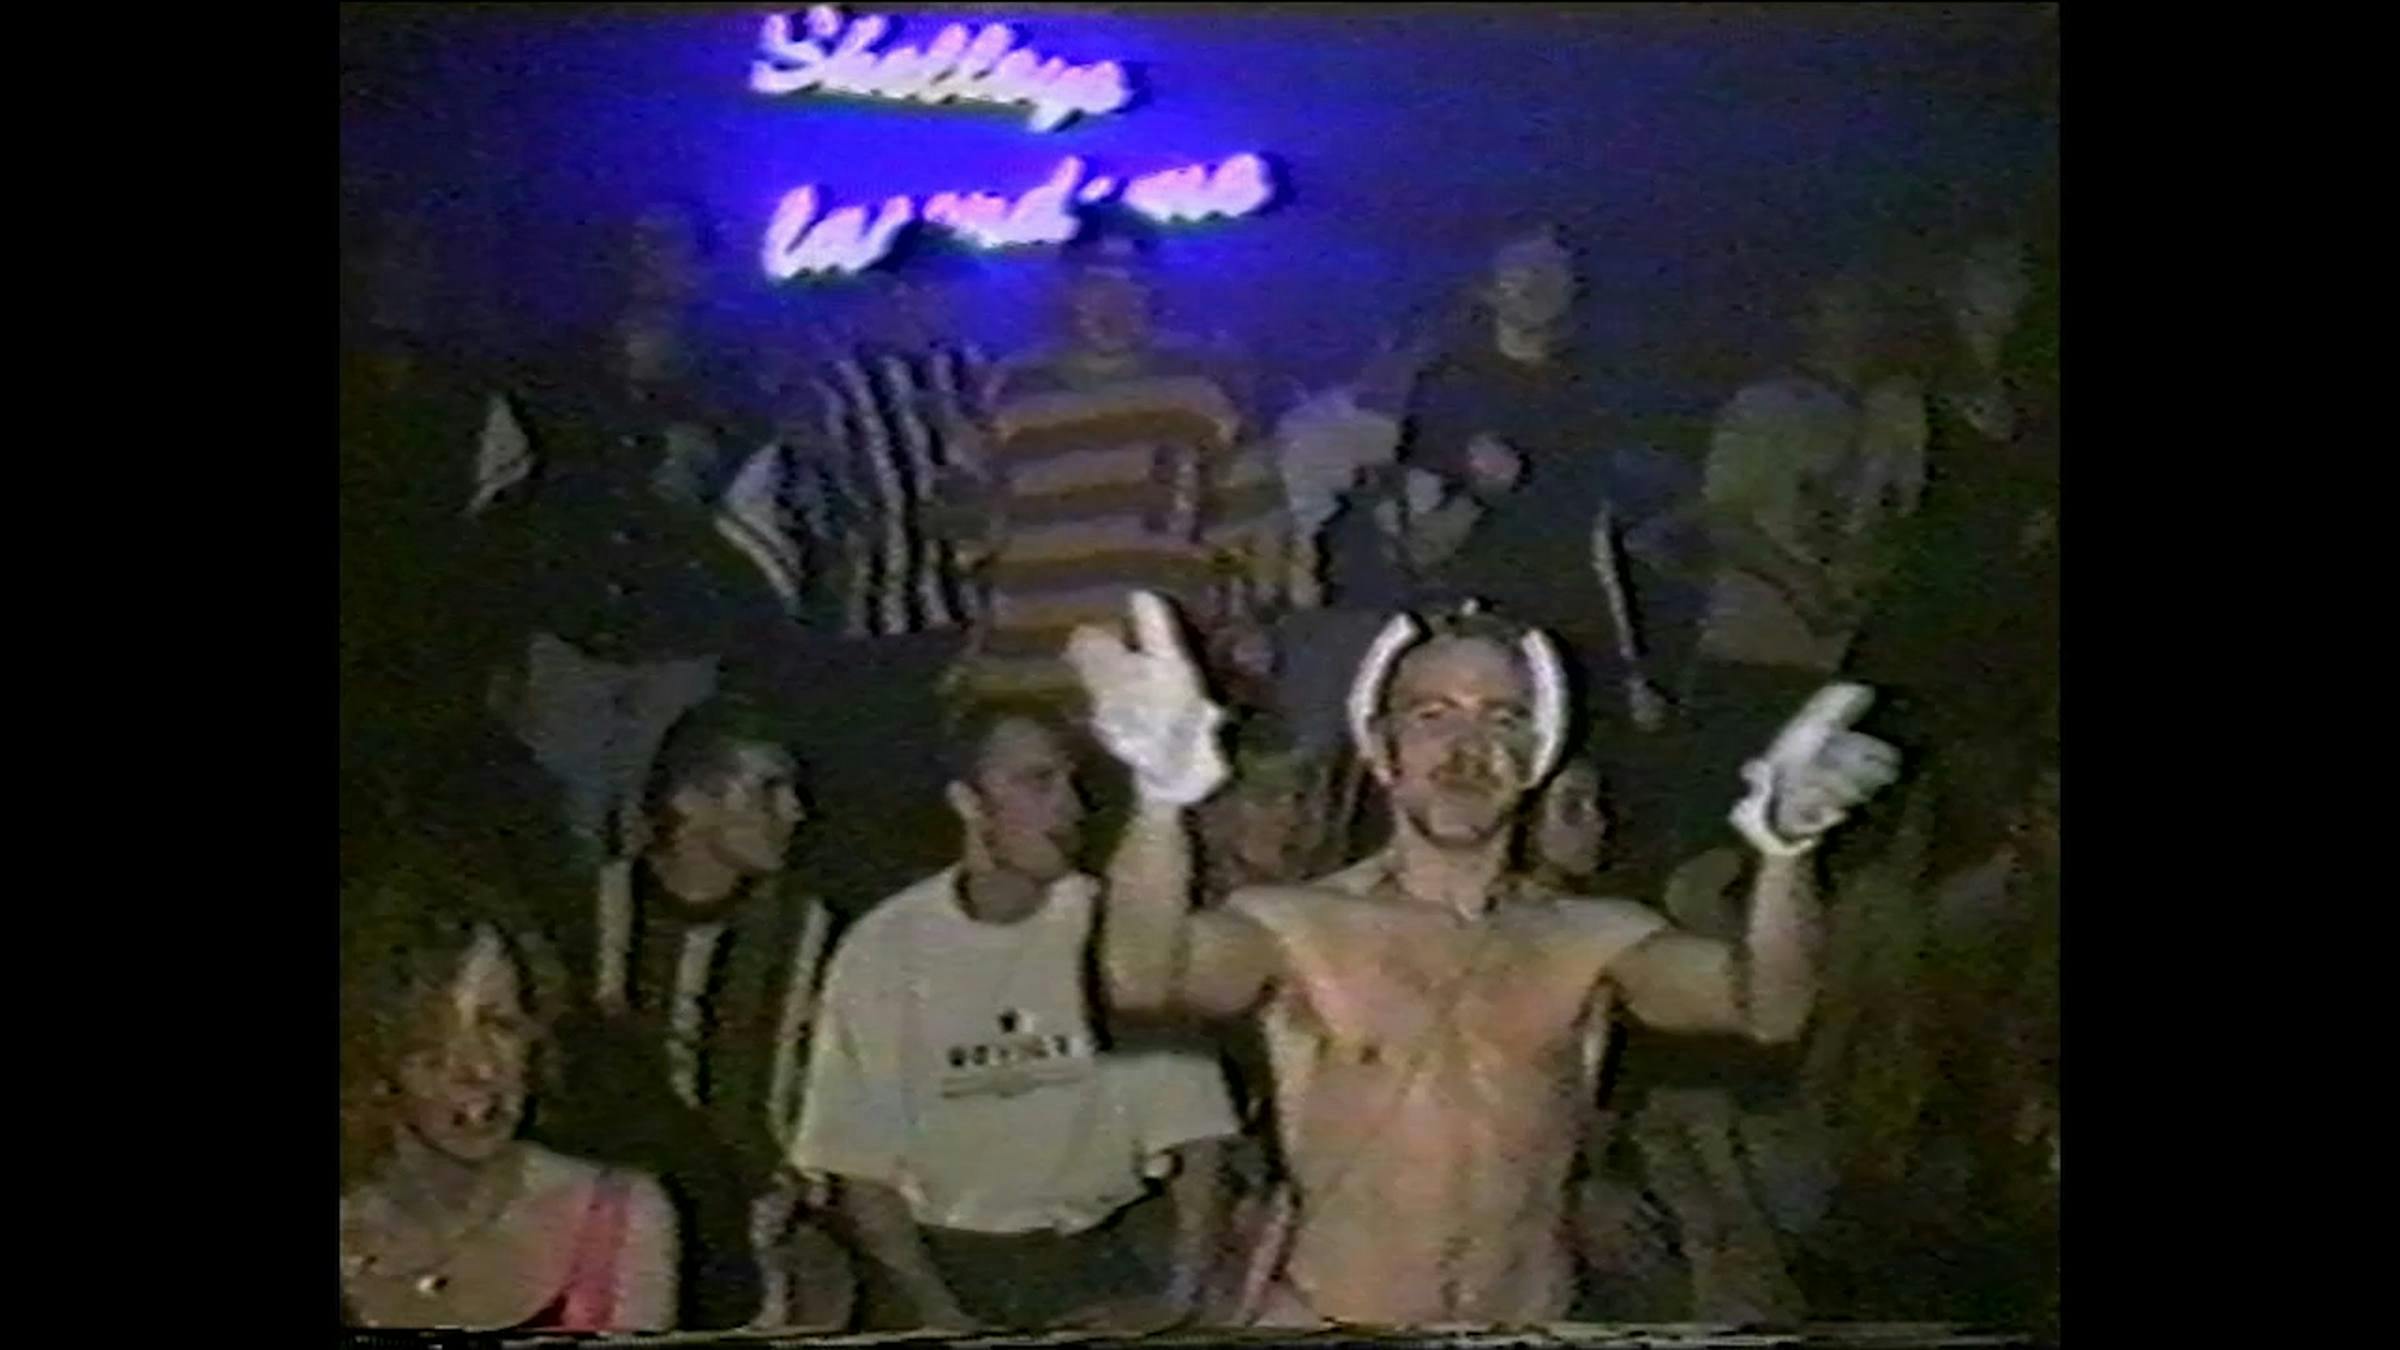 an image of people dancing at a rave in the 1990s. The person in the foreground is shirtless and is wearing white gloves on his hands